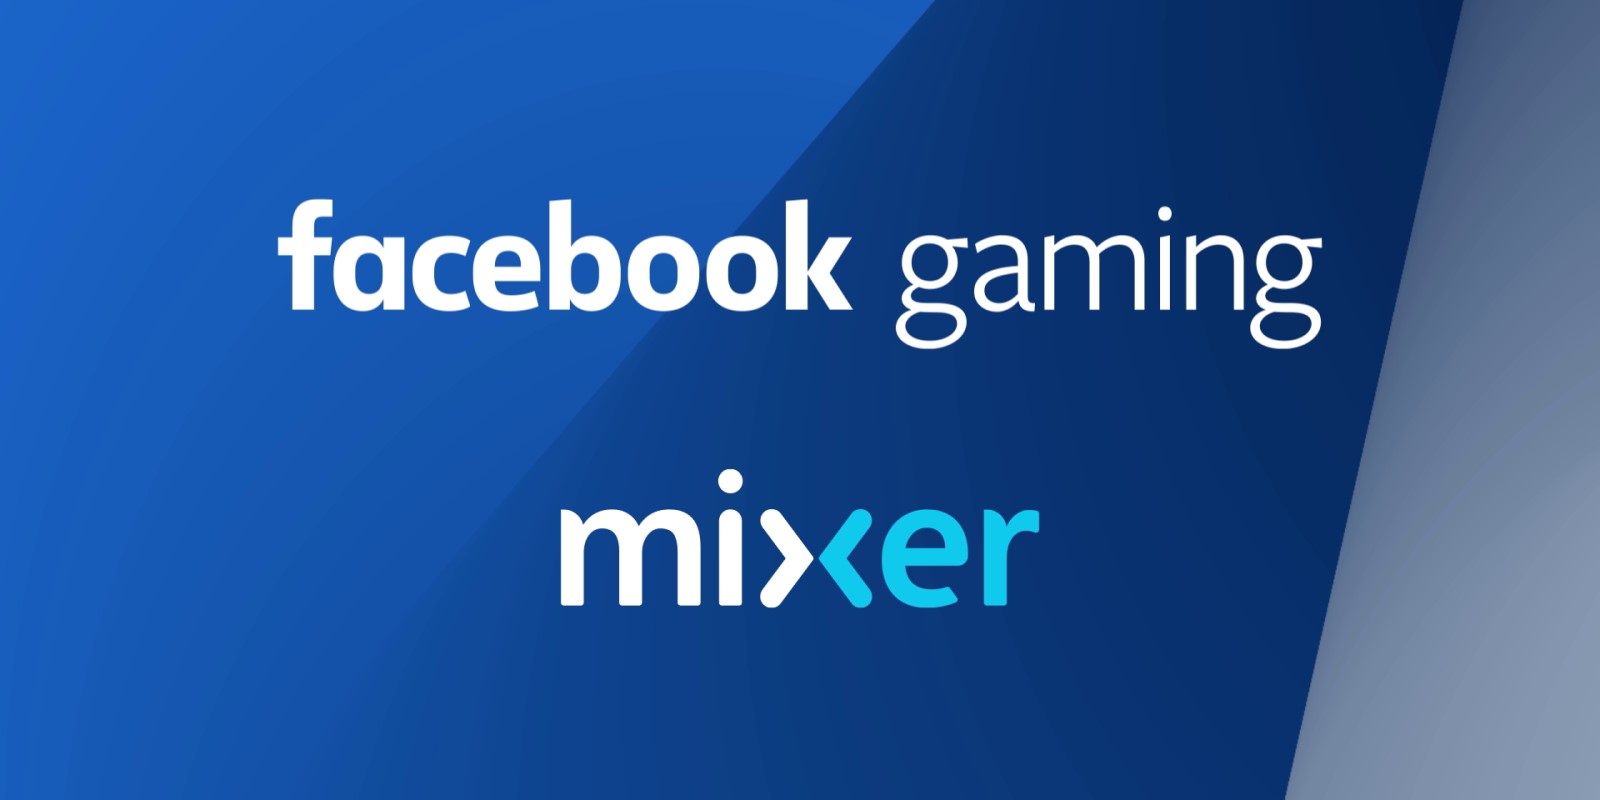 Mixer Shuts Down: What You Need to Know About Facebook Gaming